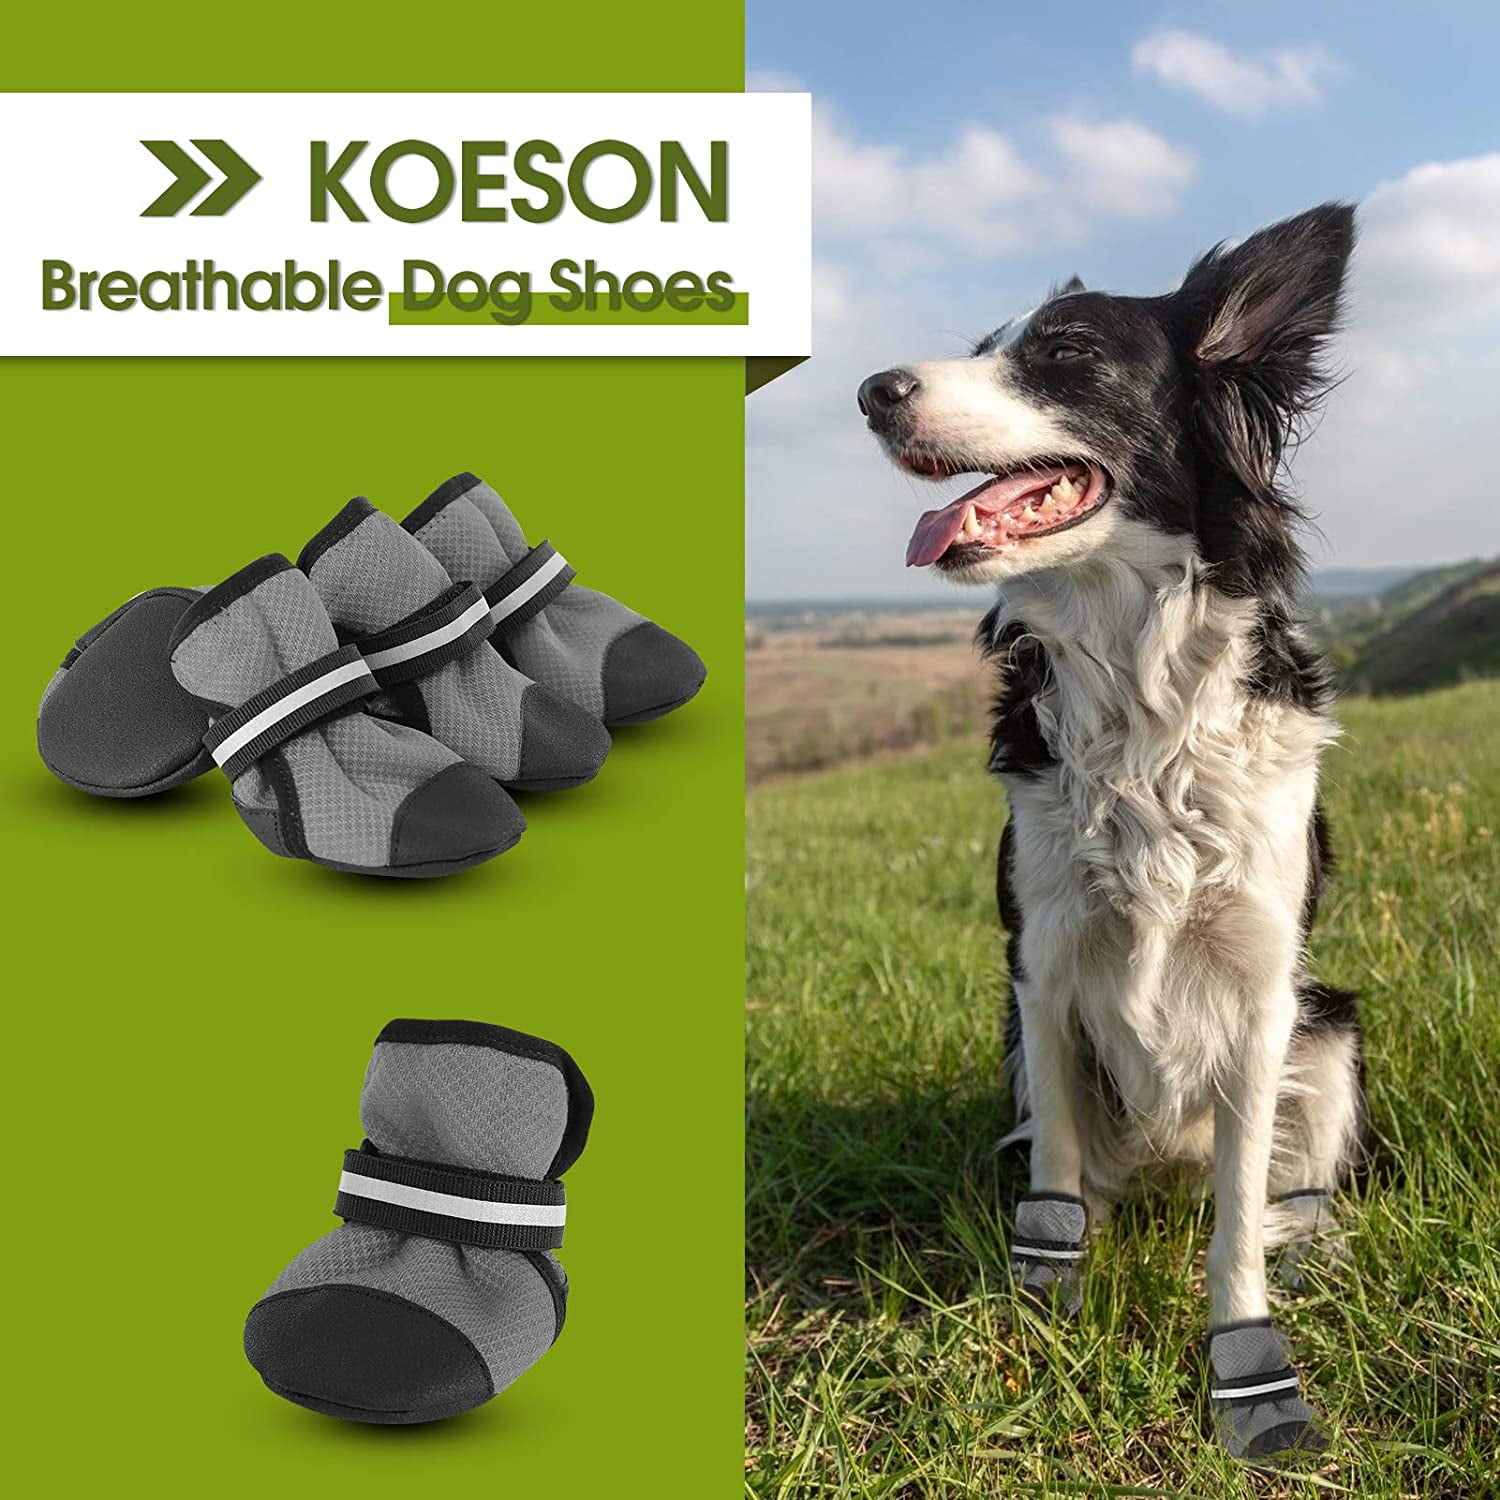 Soft & Lightweight Puppy Paw Protector with Adjustable Strap for Small Breeds KOESON Mini Dog Shoes Breathable Mesh Dog Booties for Hot Pavement Summer Pet Sandals 